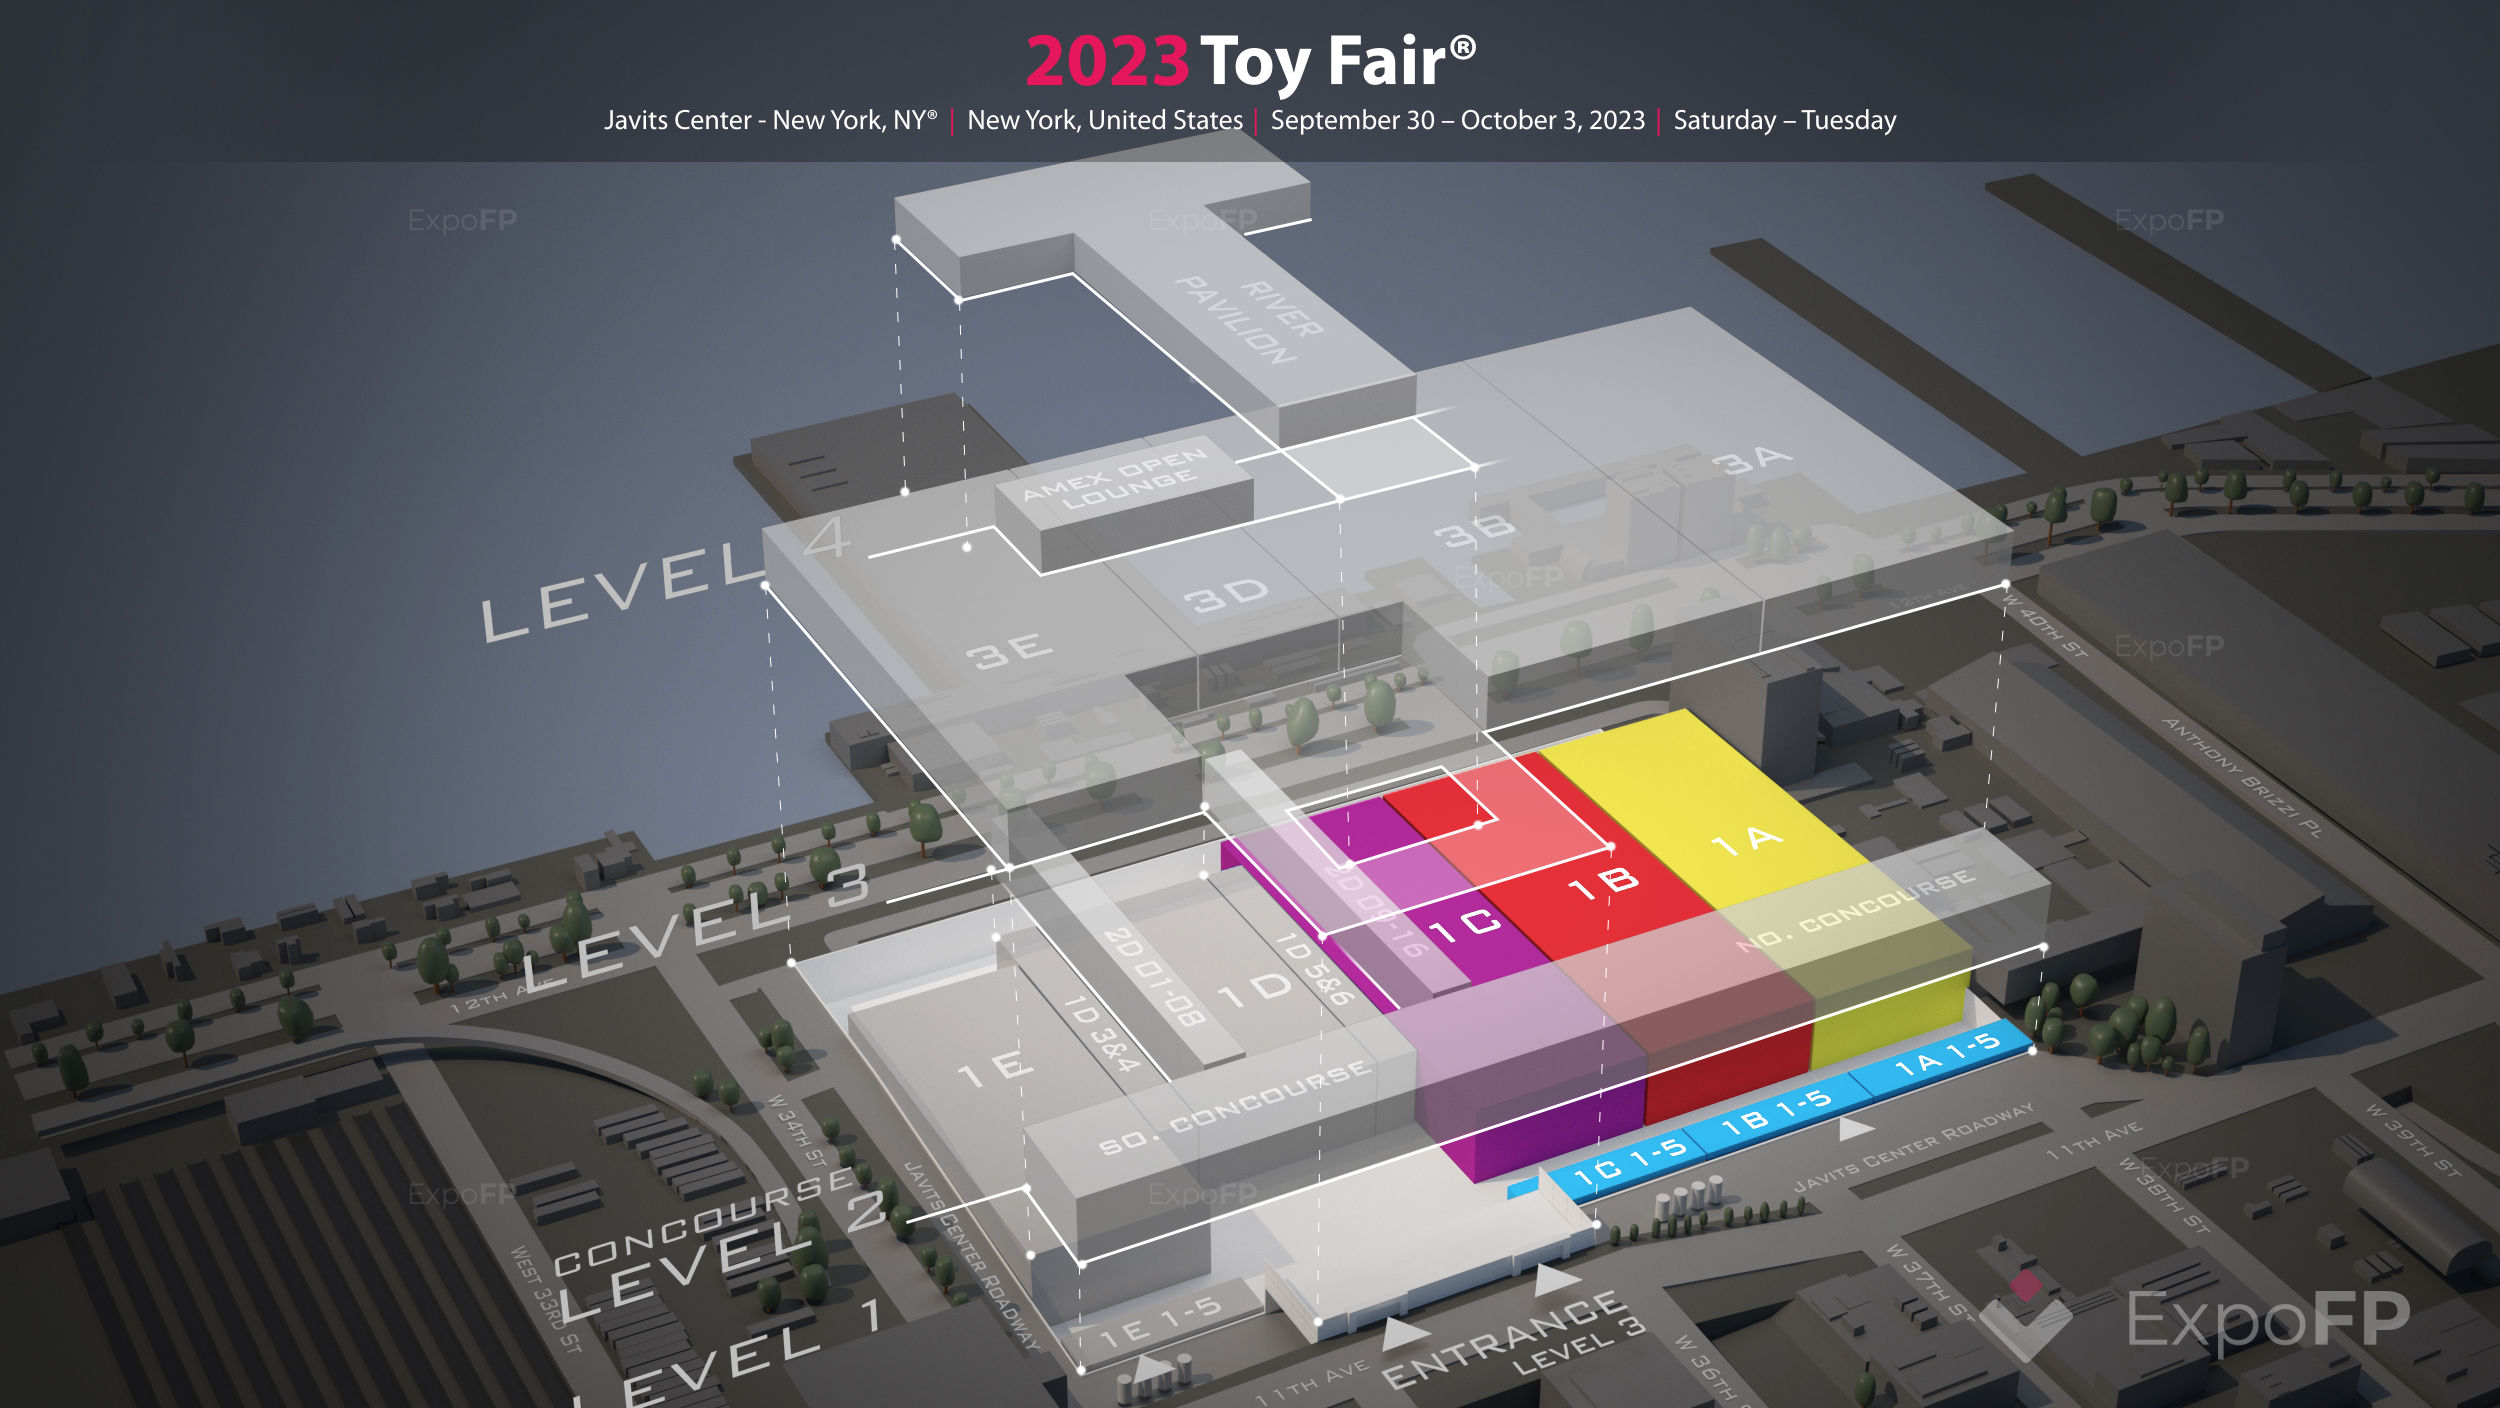 Toy Fair 2023 In Javits Center New